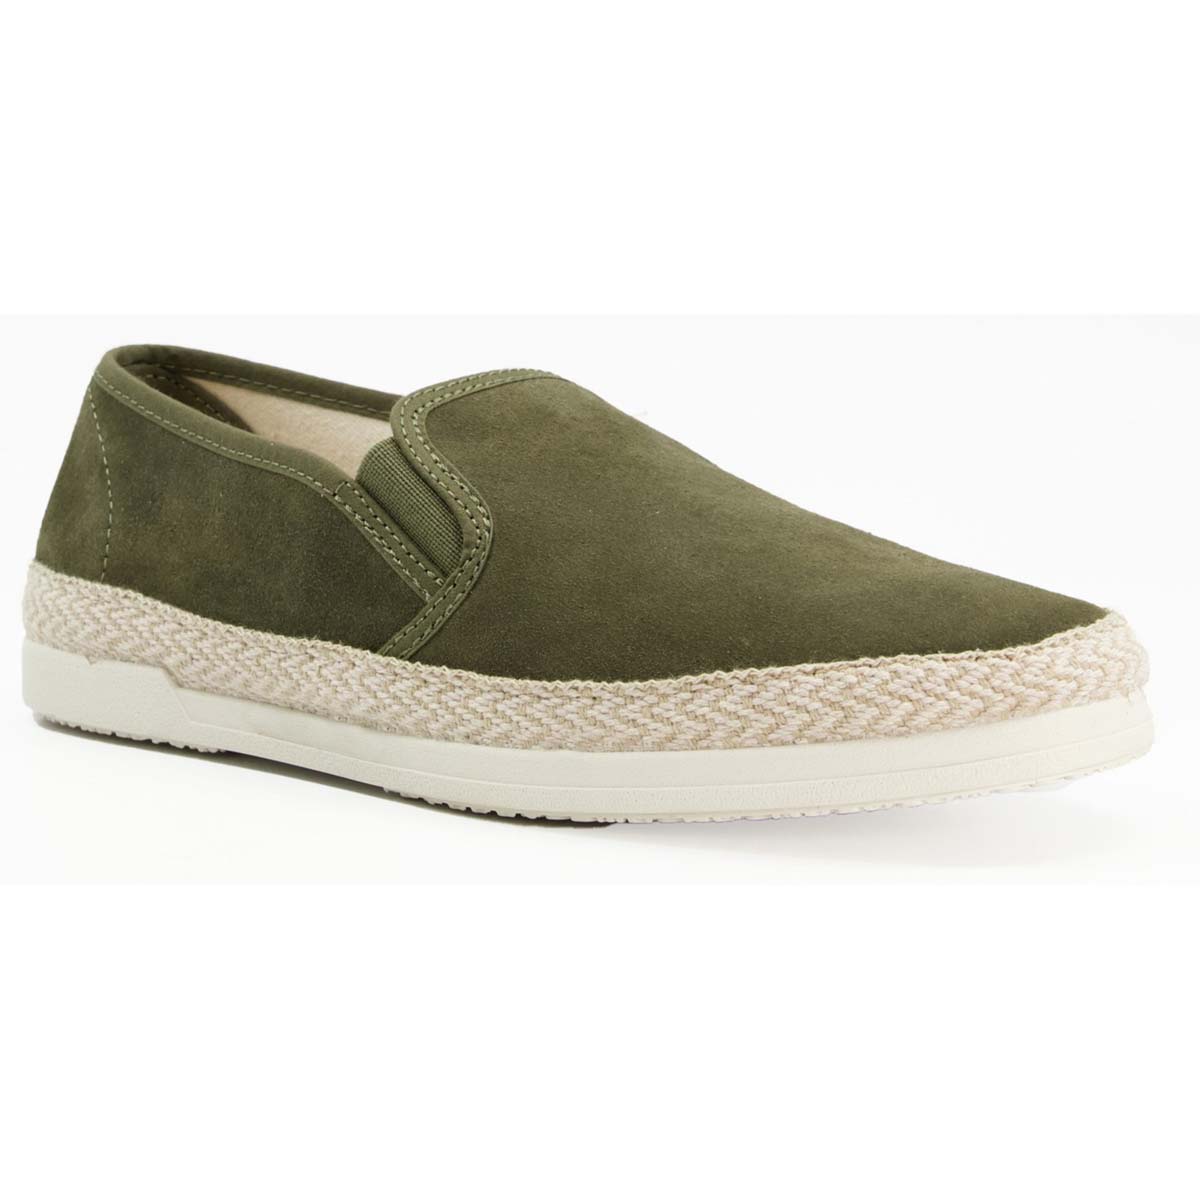 Dune London Francisco Khaki Mens Slip-on Shoes 1427509020002 in a Plain Leather in Size 8